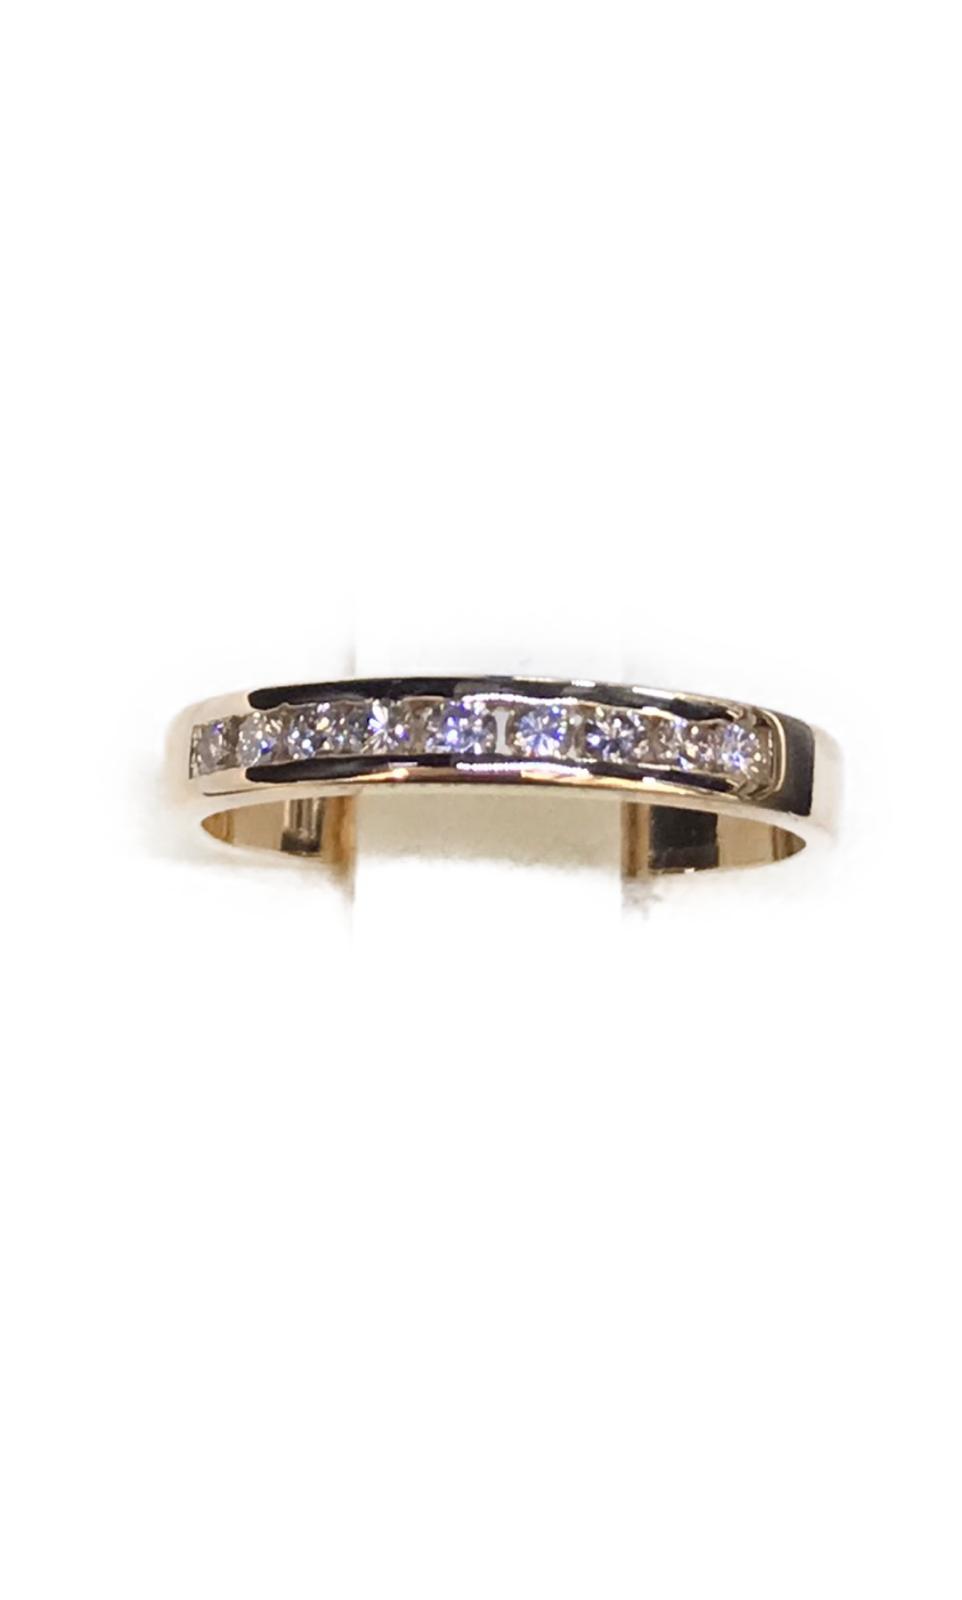 14Kt Yellow Gold and Diamond Ring #4109